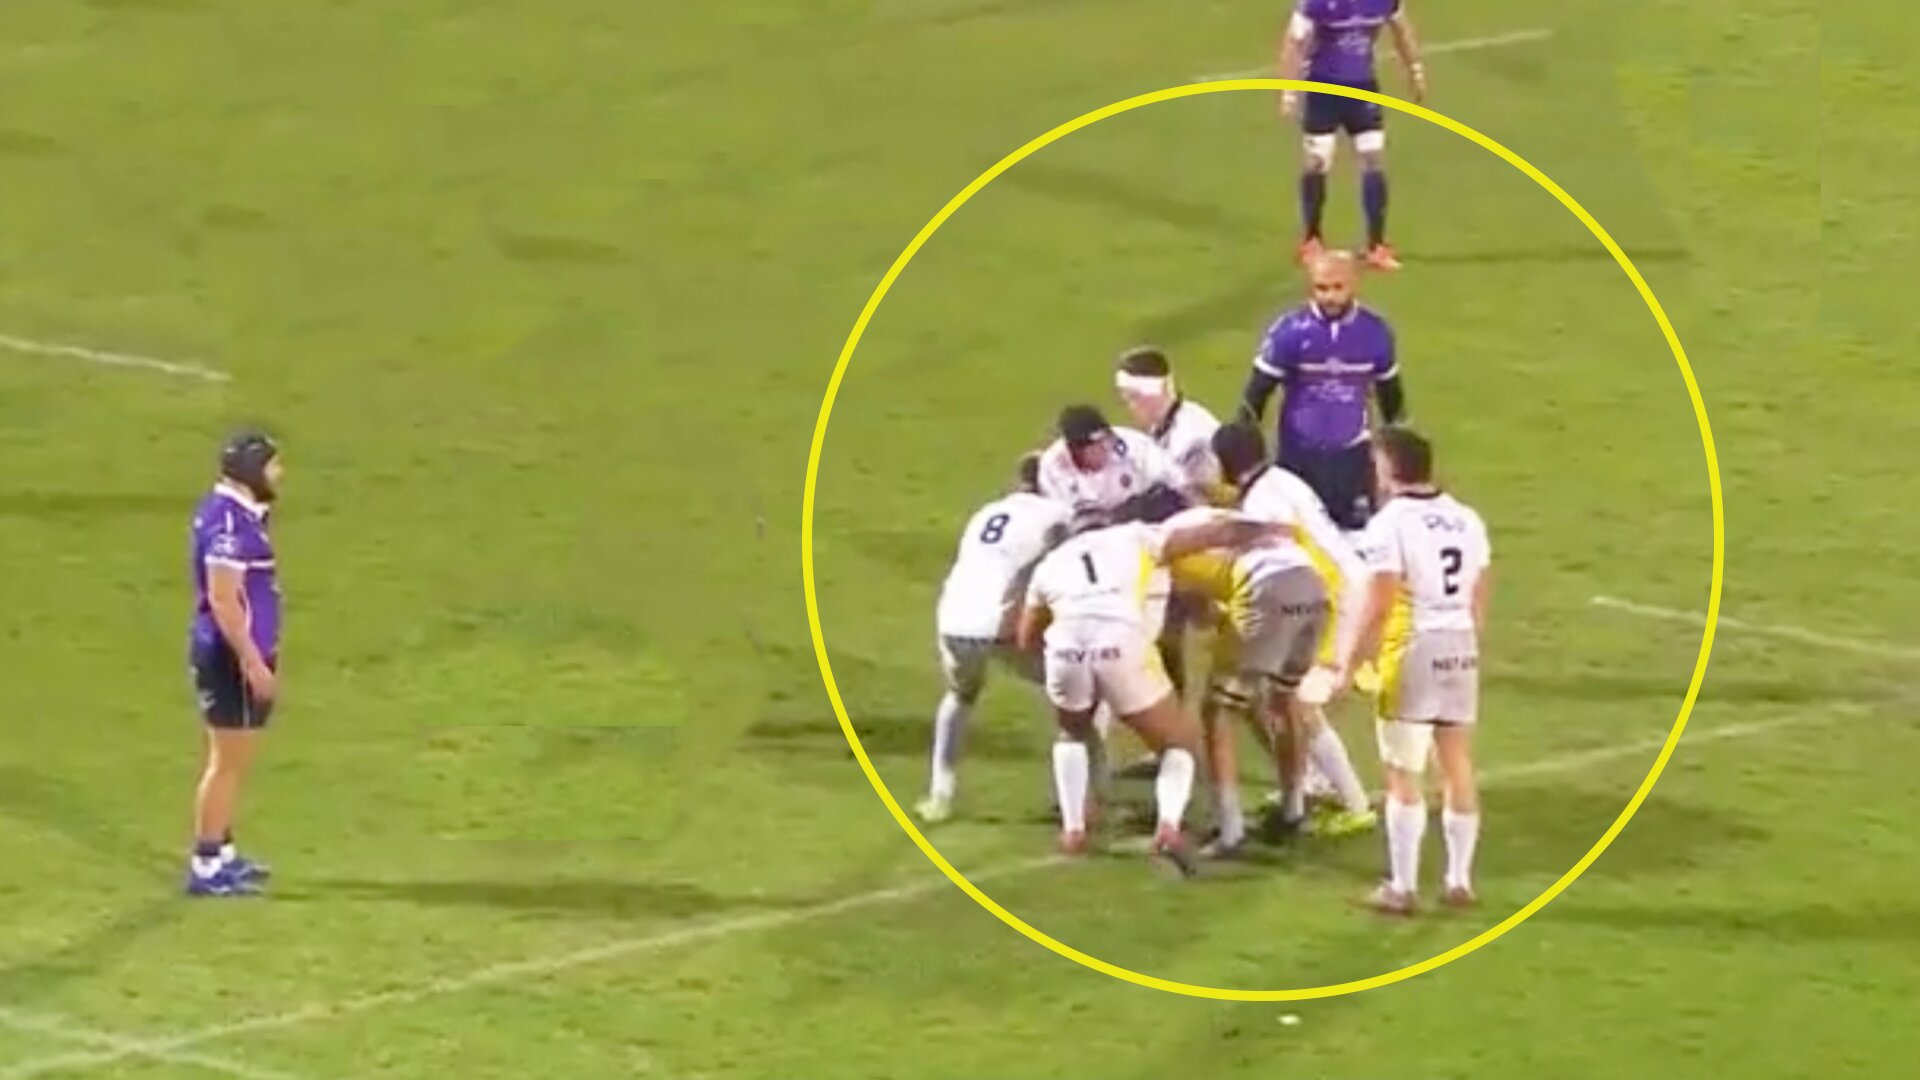 French defence down tools in bizarre scenes from last night's Pro D2 clash